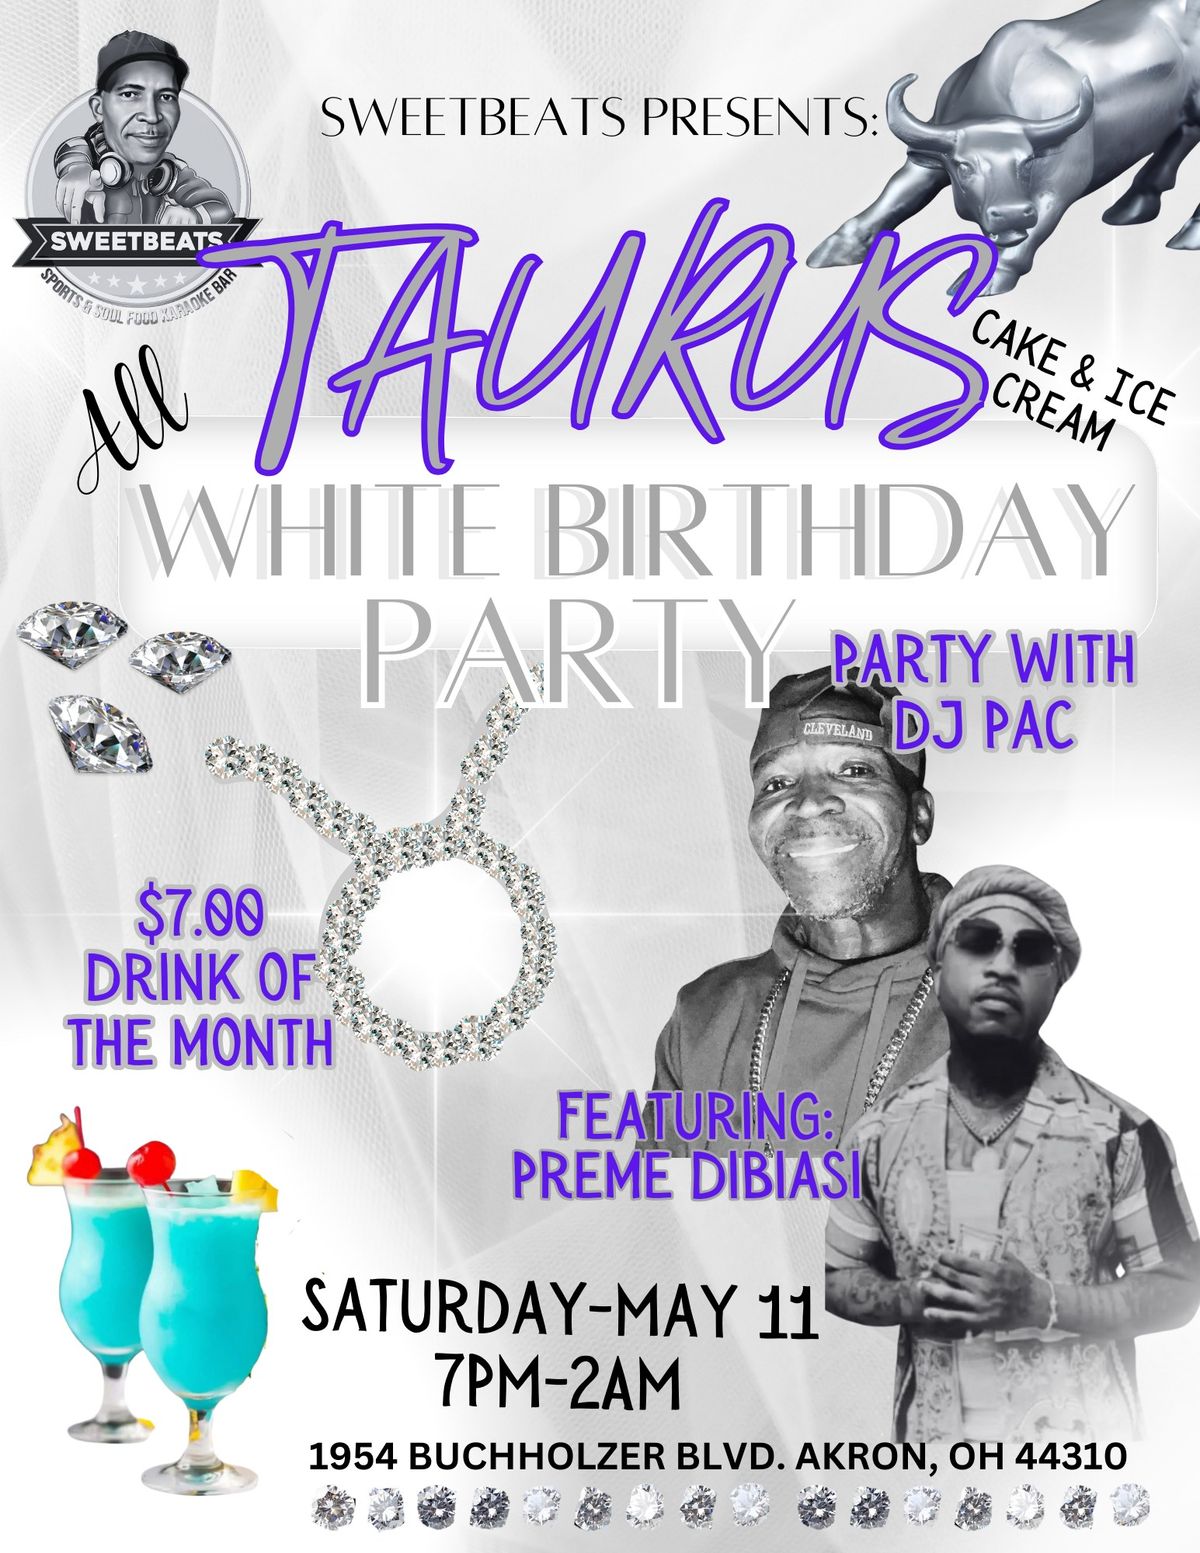 SWEETBEATS PRESENTS: TAURUS ALL WHITE PARTY FEATURING PREME DIBIASI